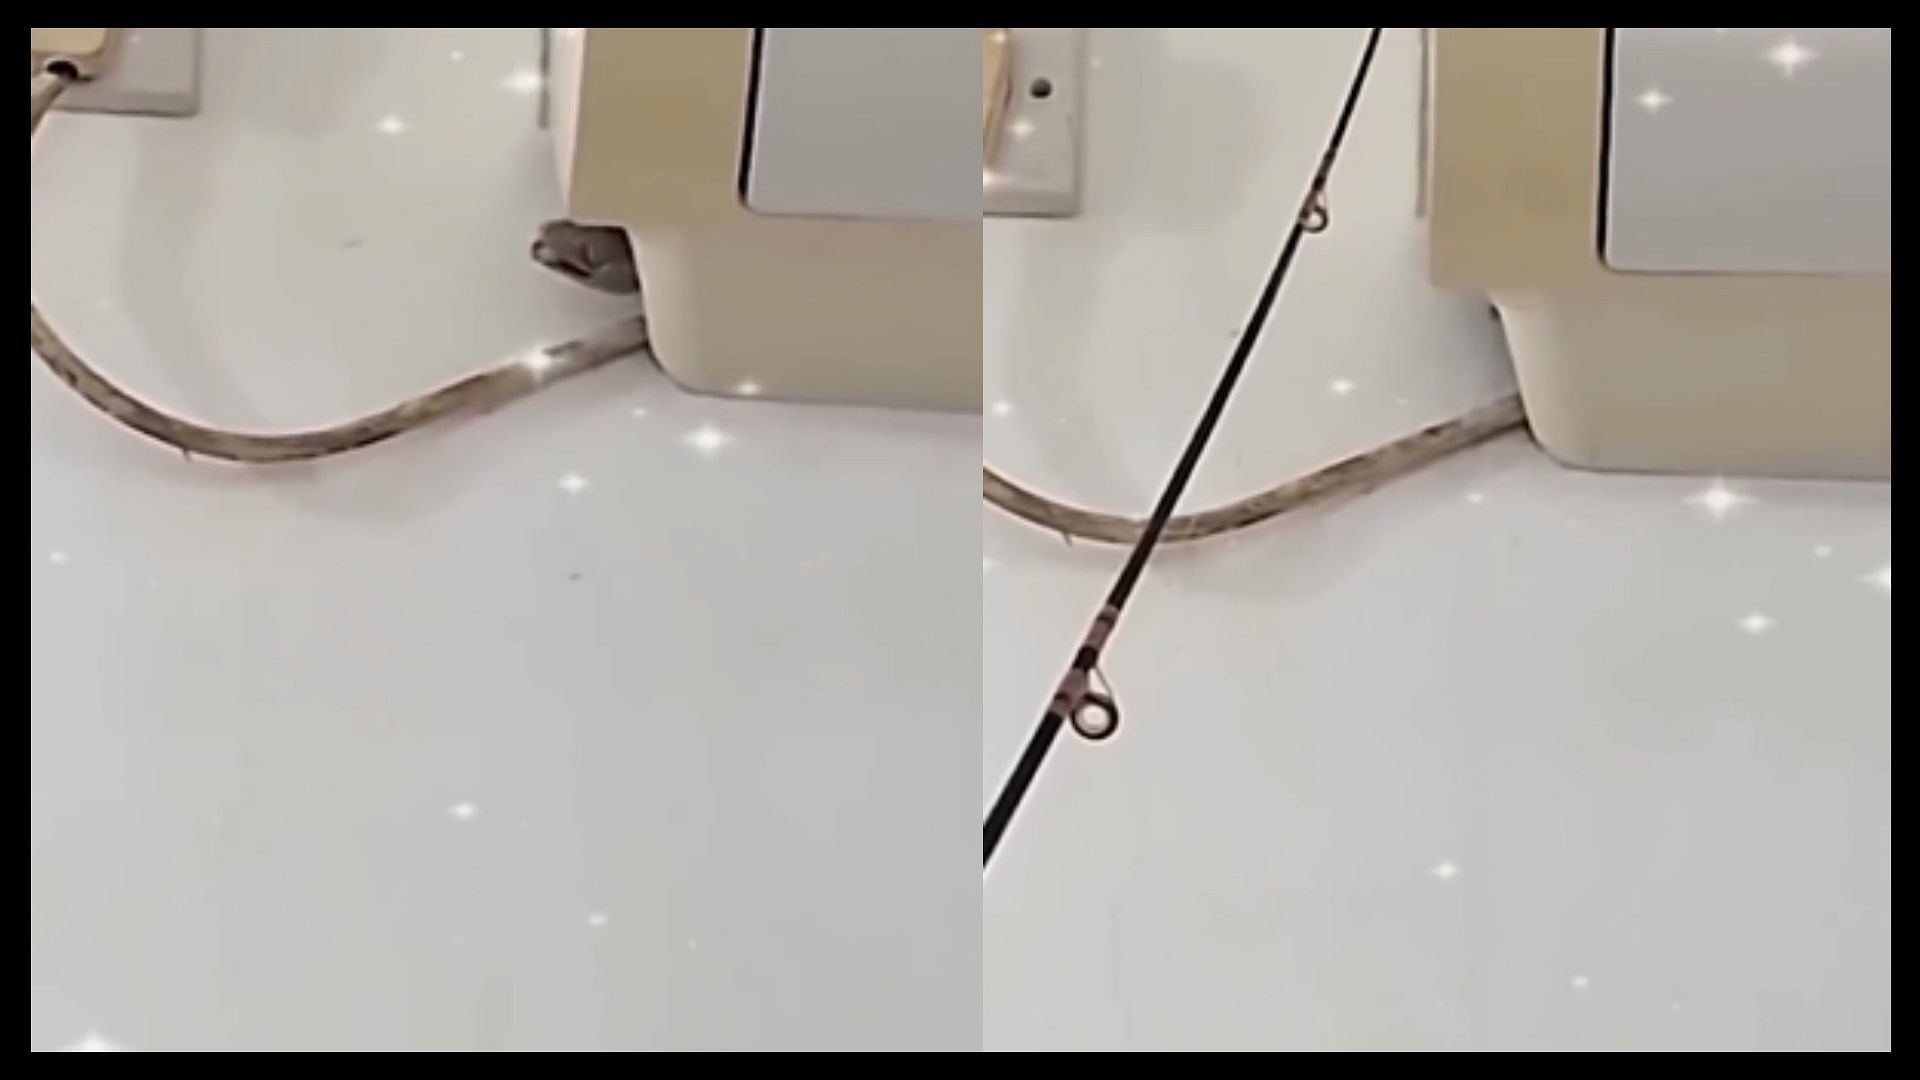 Man caught lizard with fishing line unique trick to catch lizard